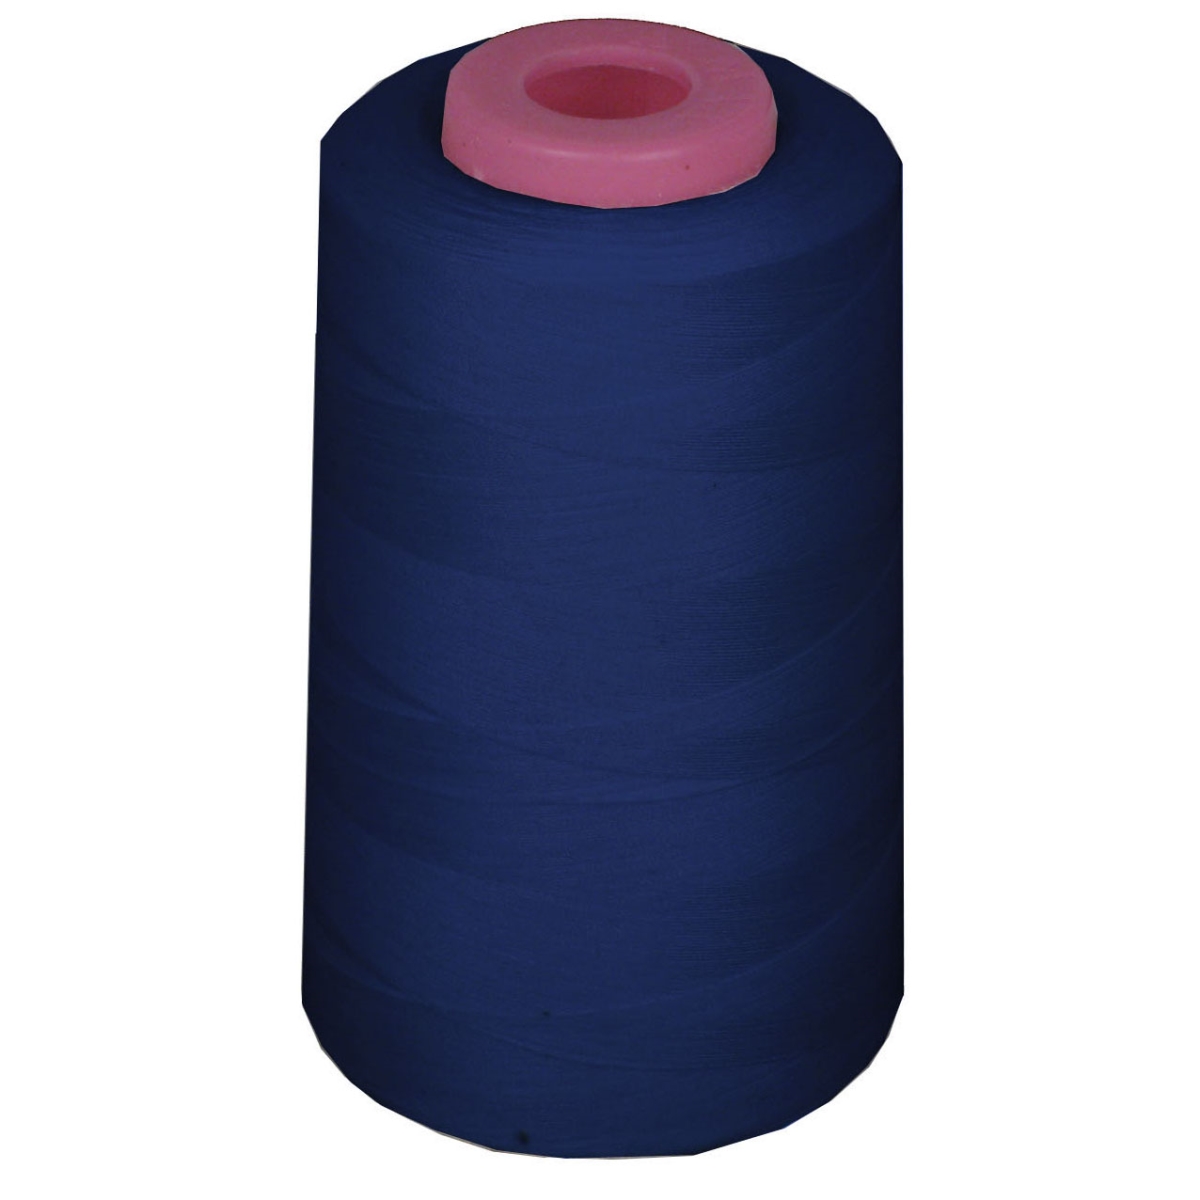 Picture of LA Linen ThreadNavyA602 6000 Yards 100 Percent Polyester Cone Serger Thread, Navy Blue - A602